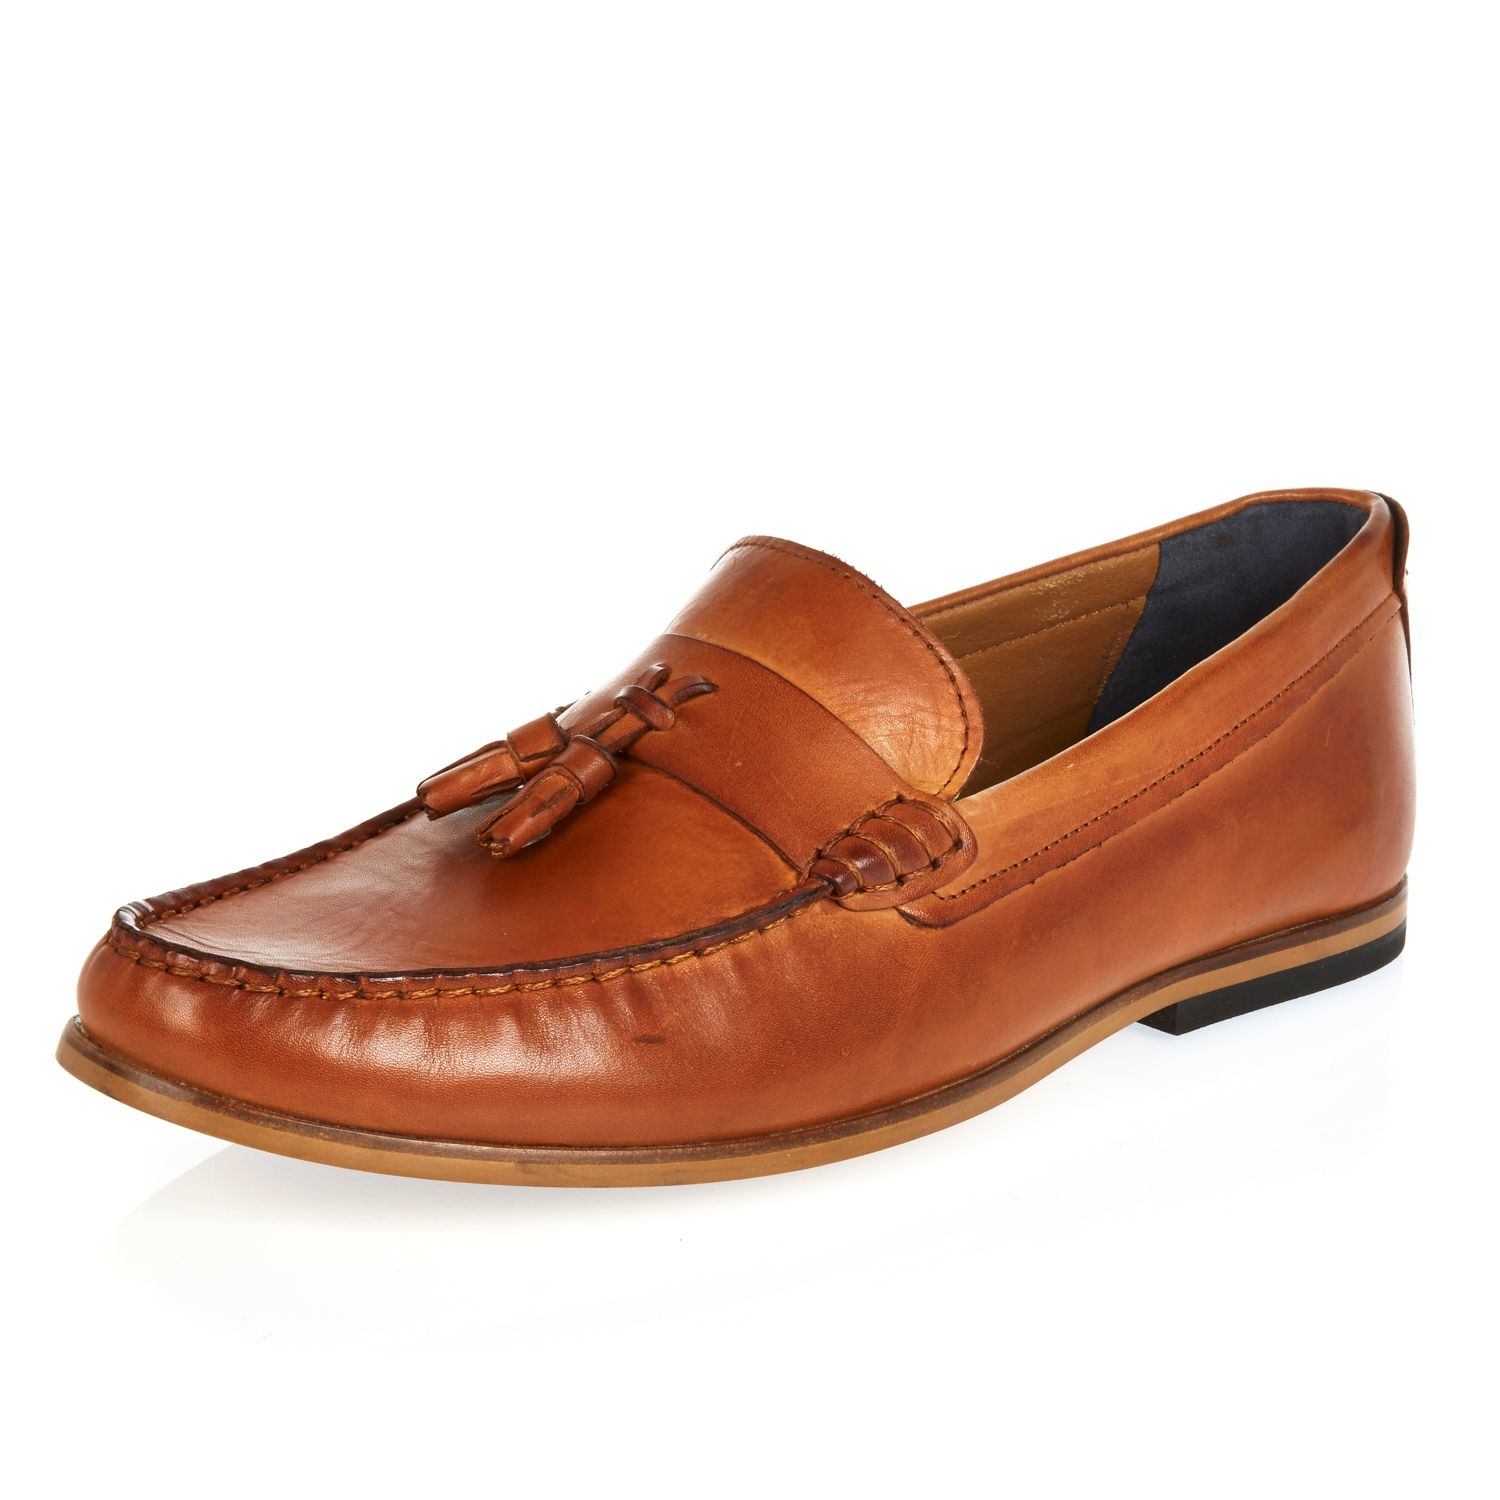 River Island Tan Brown Leather Tassel Loafers for Men - Lyst